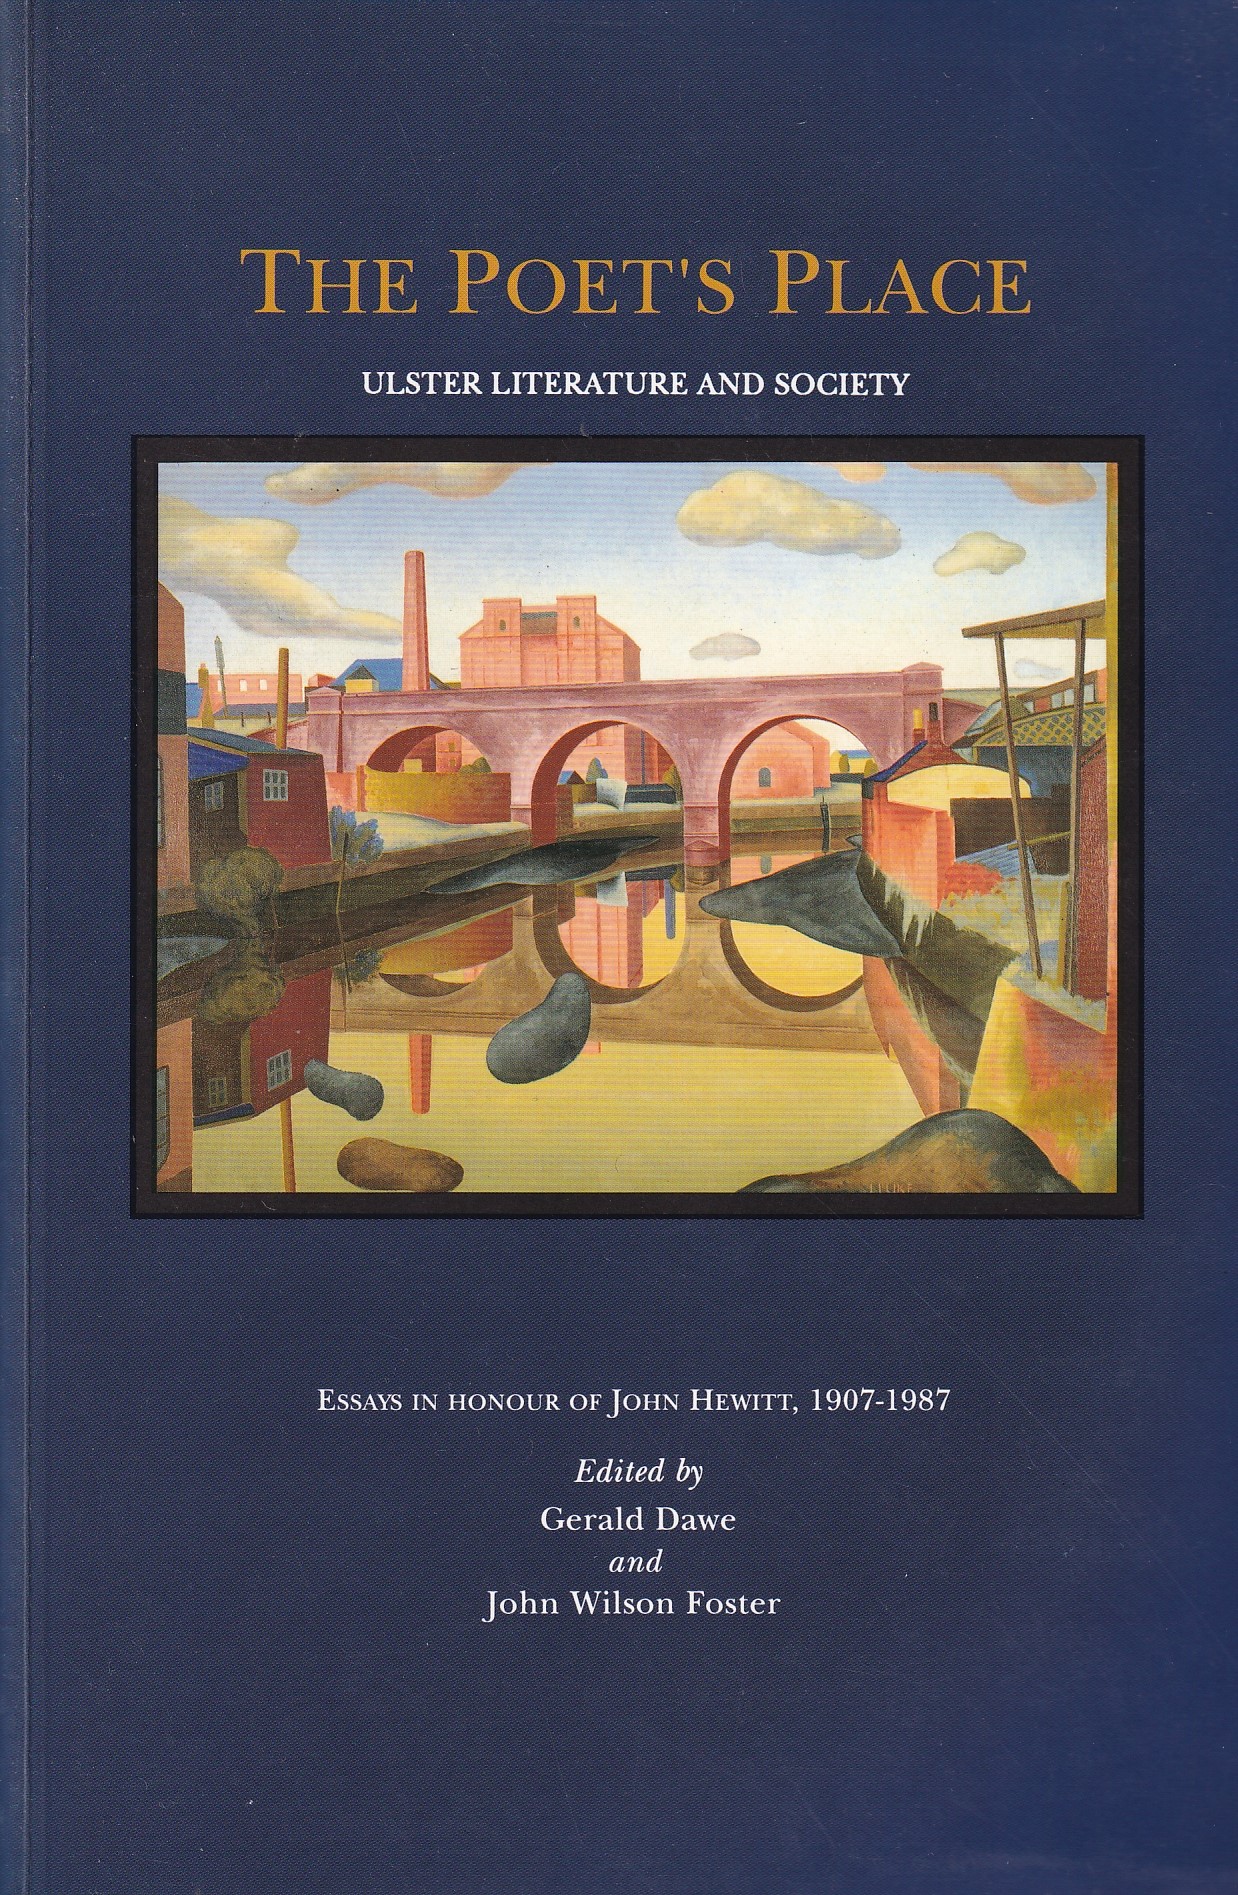 The Poet’s Place: Ulster Literature and Society – Essays in Honour of John Hewitt, 1907-1987 by Gerald Dawe & John Wilson Foster